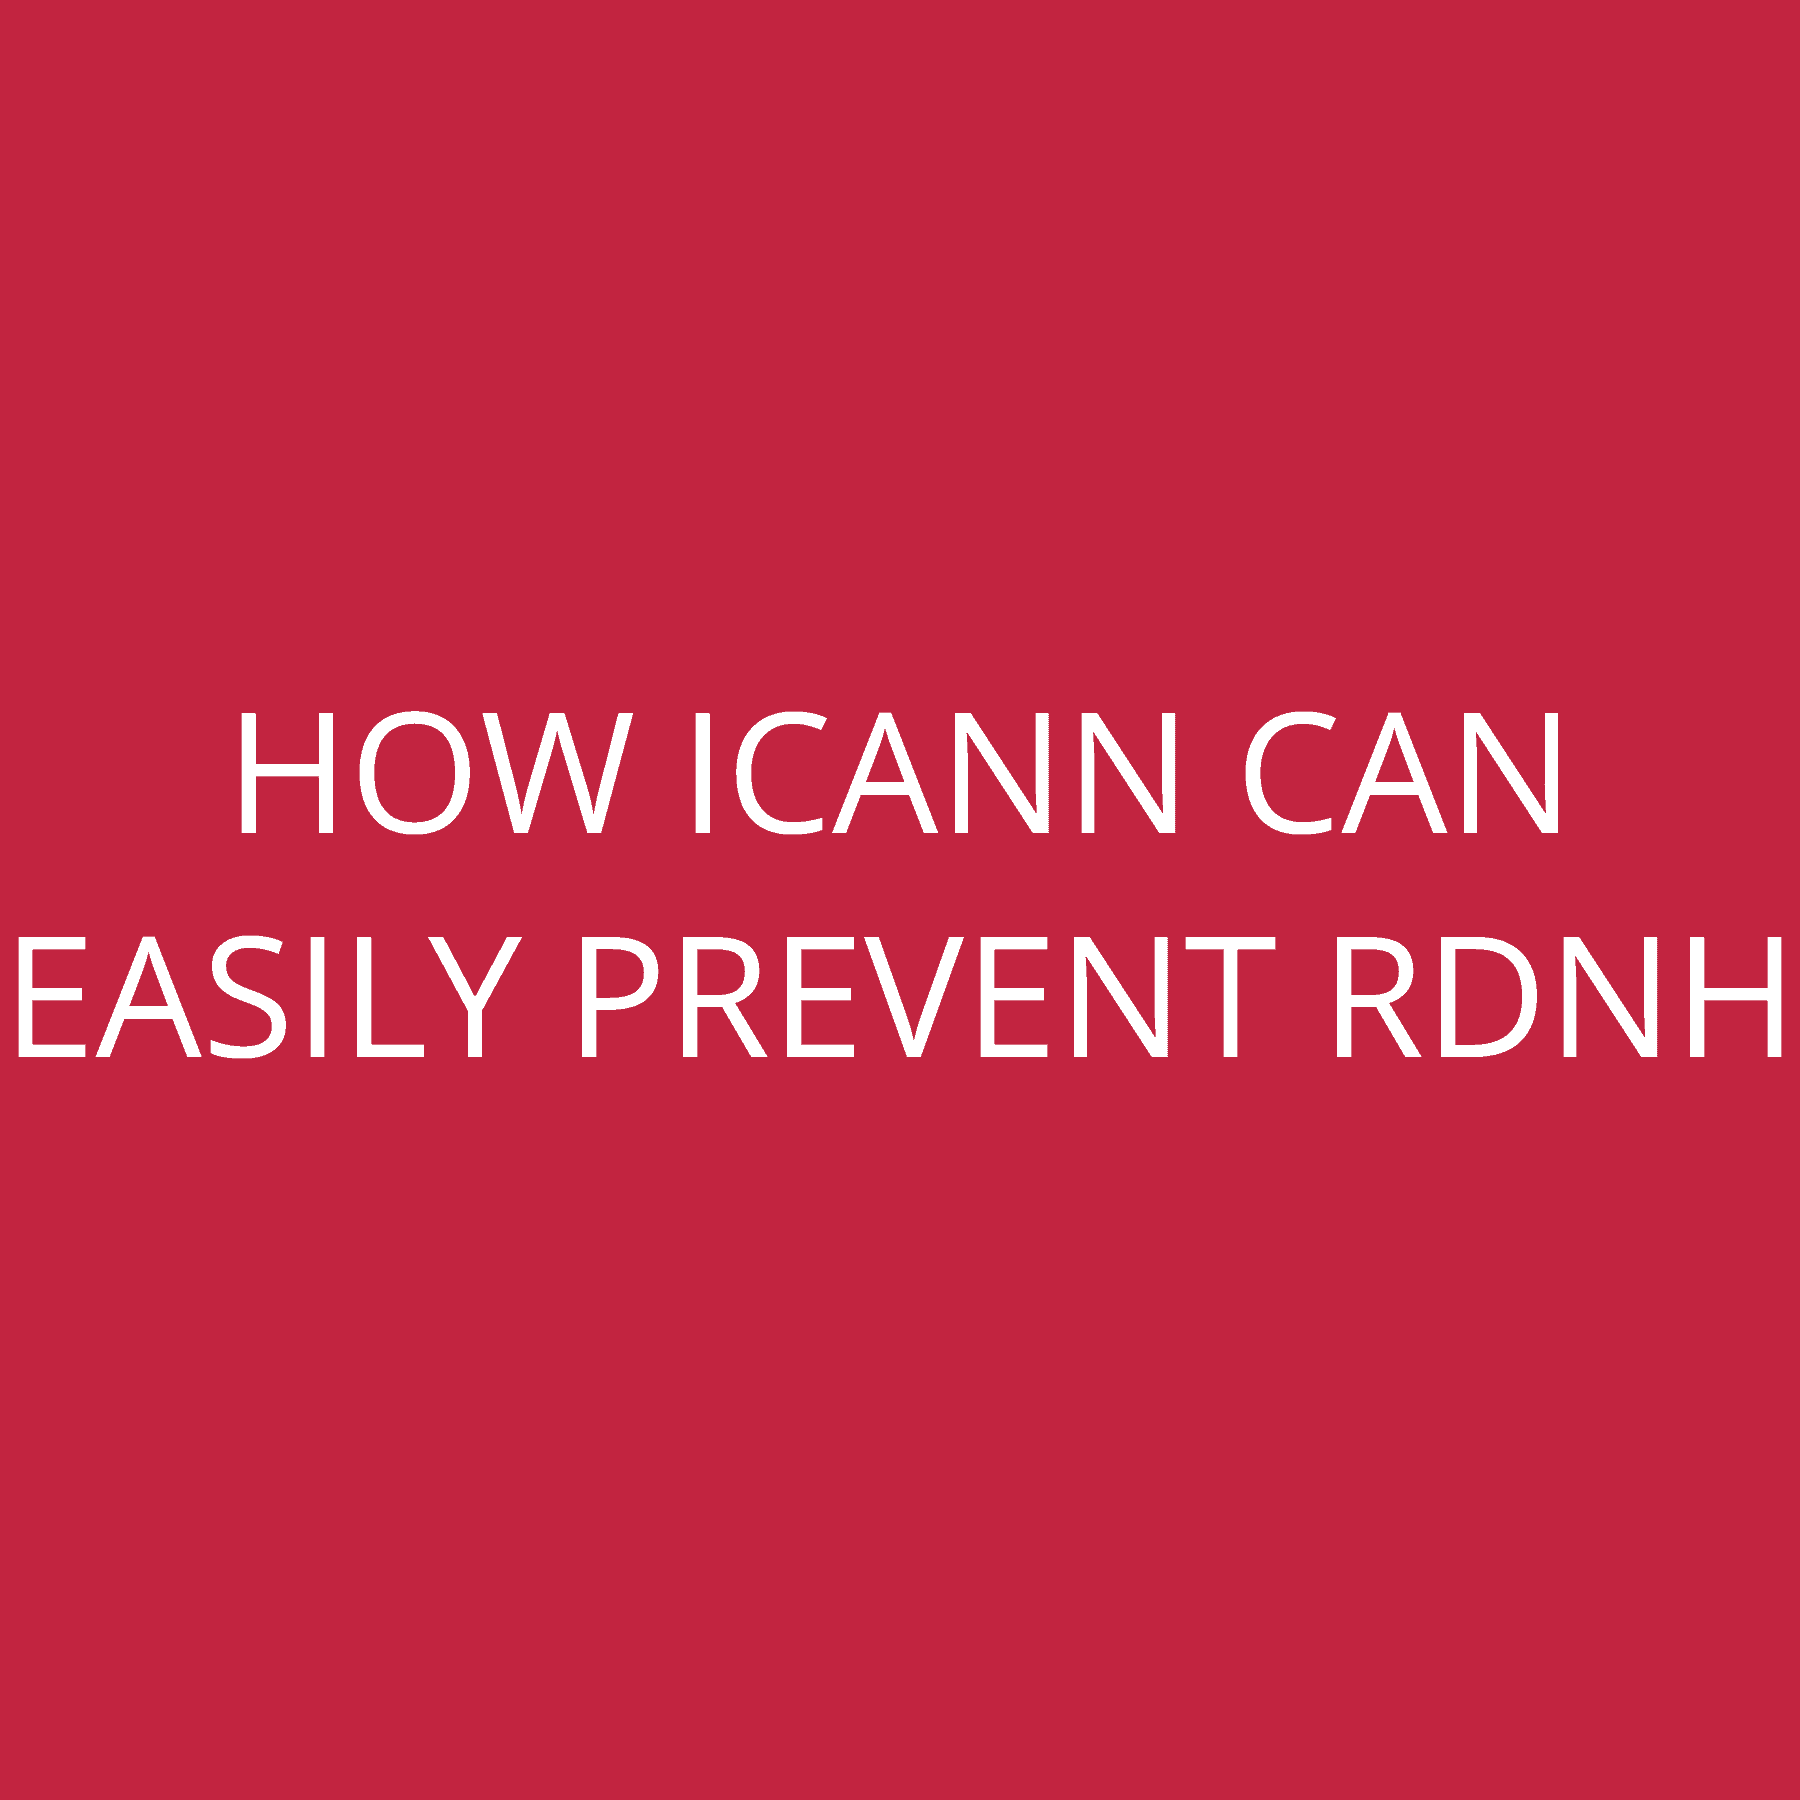 How ICANN can easily prevent RDNH